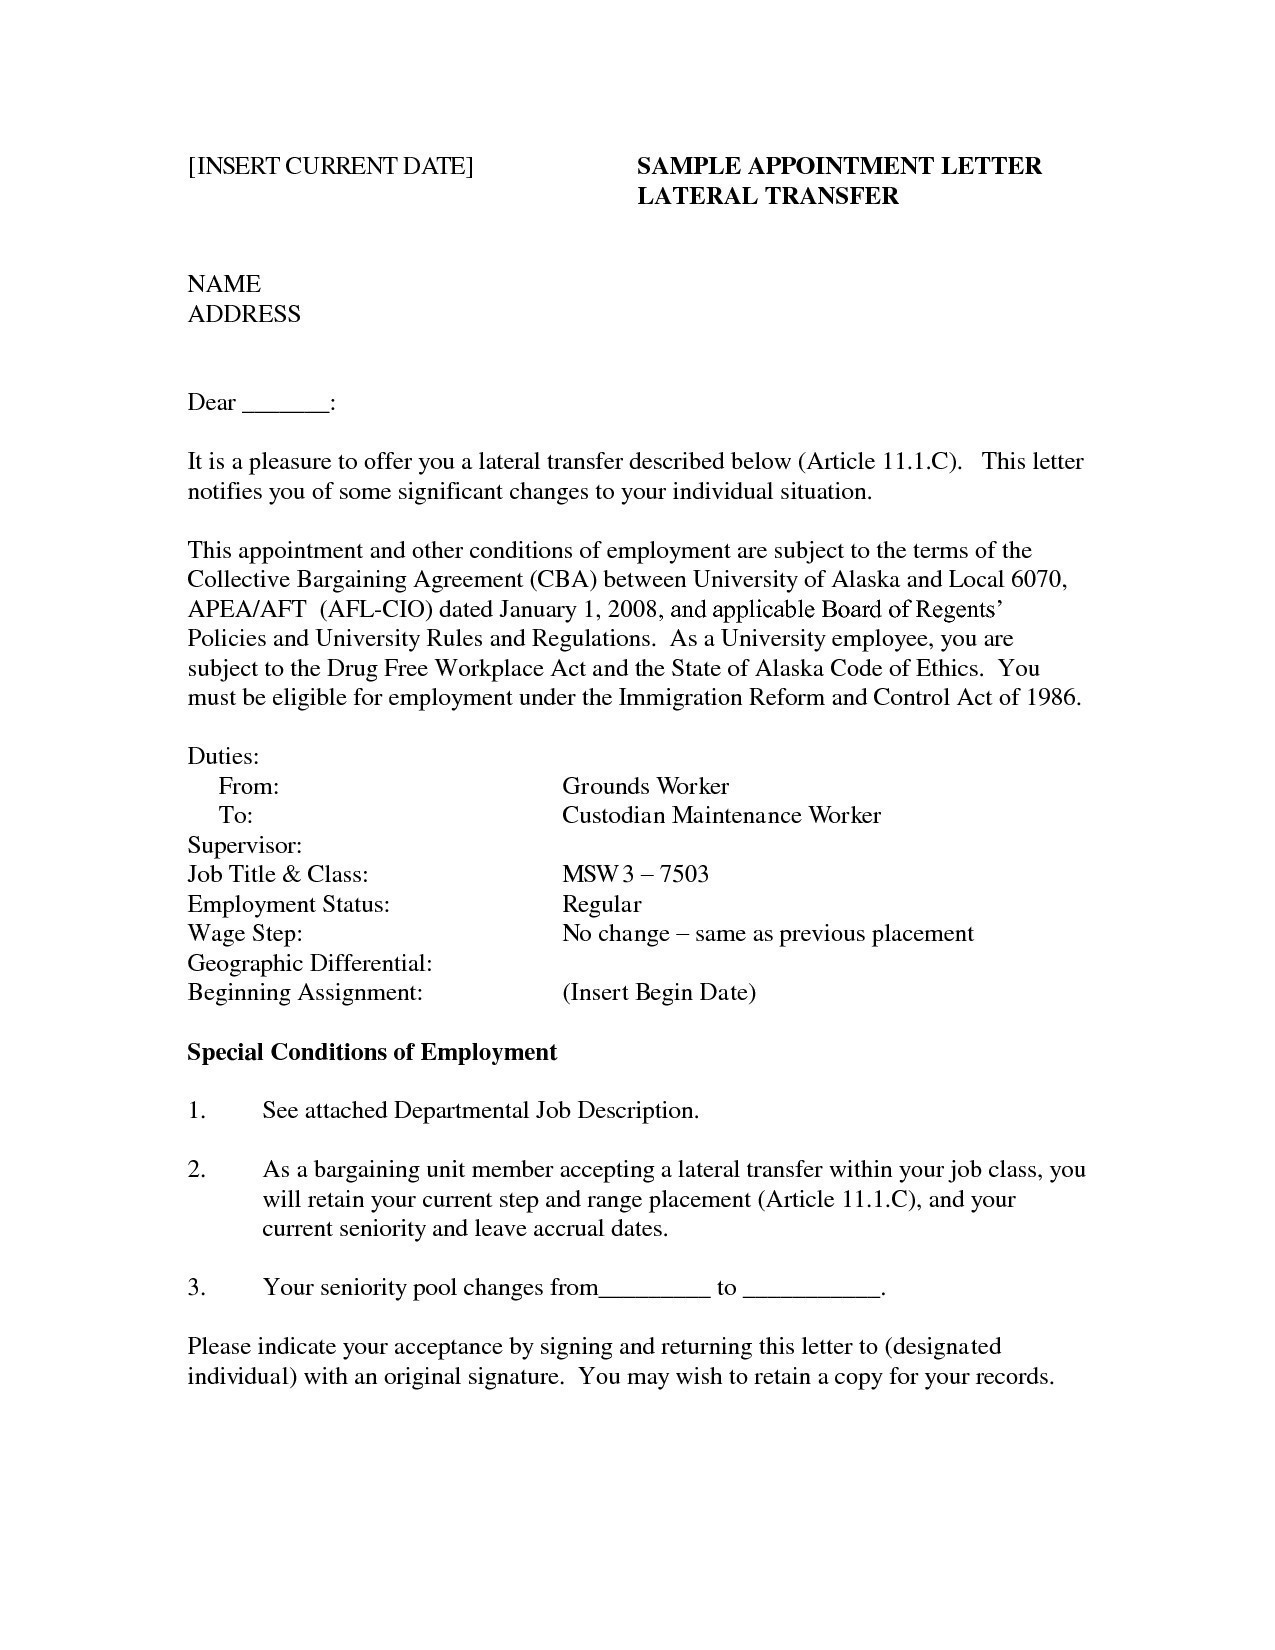 Land Offer Letter Template - Do You Introduce Yourself In A Cover Letter